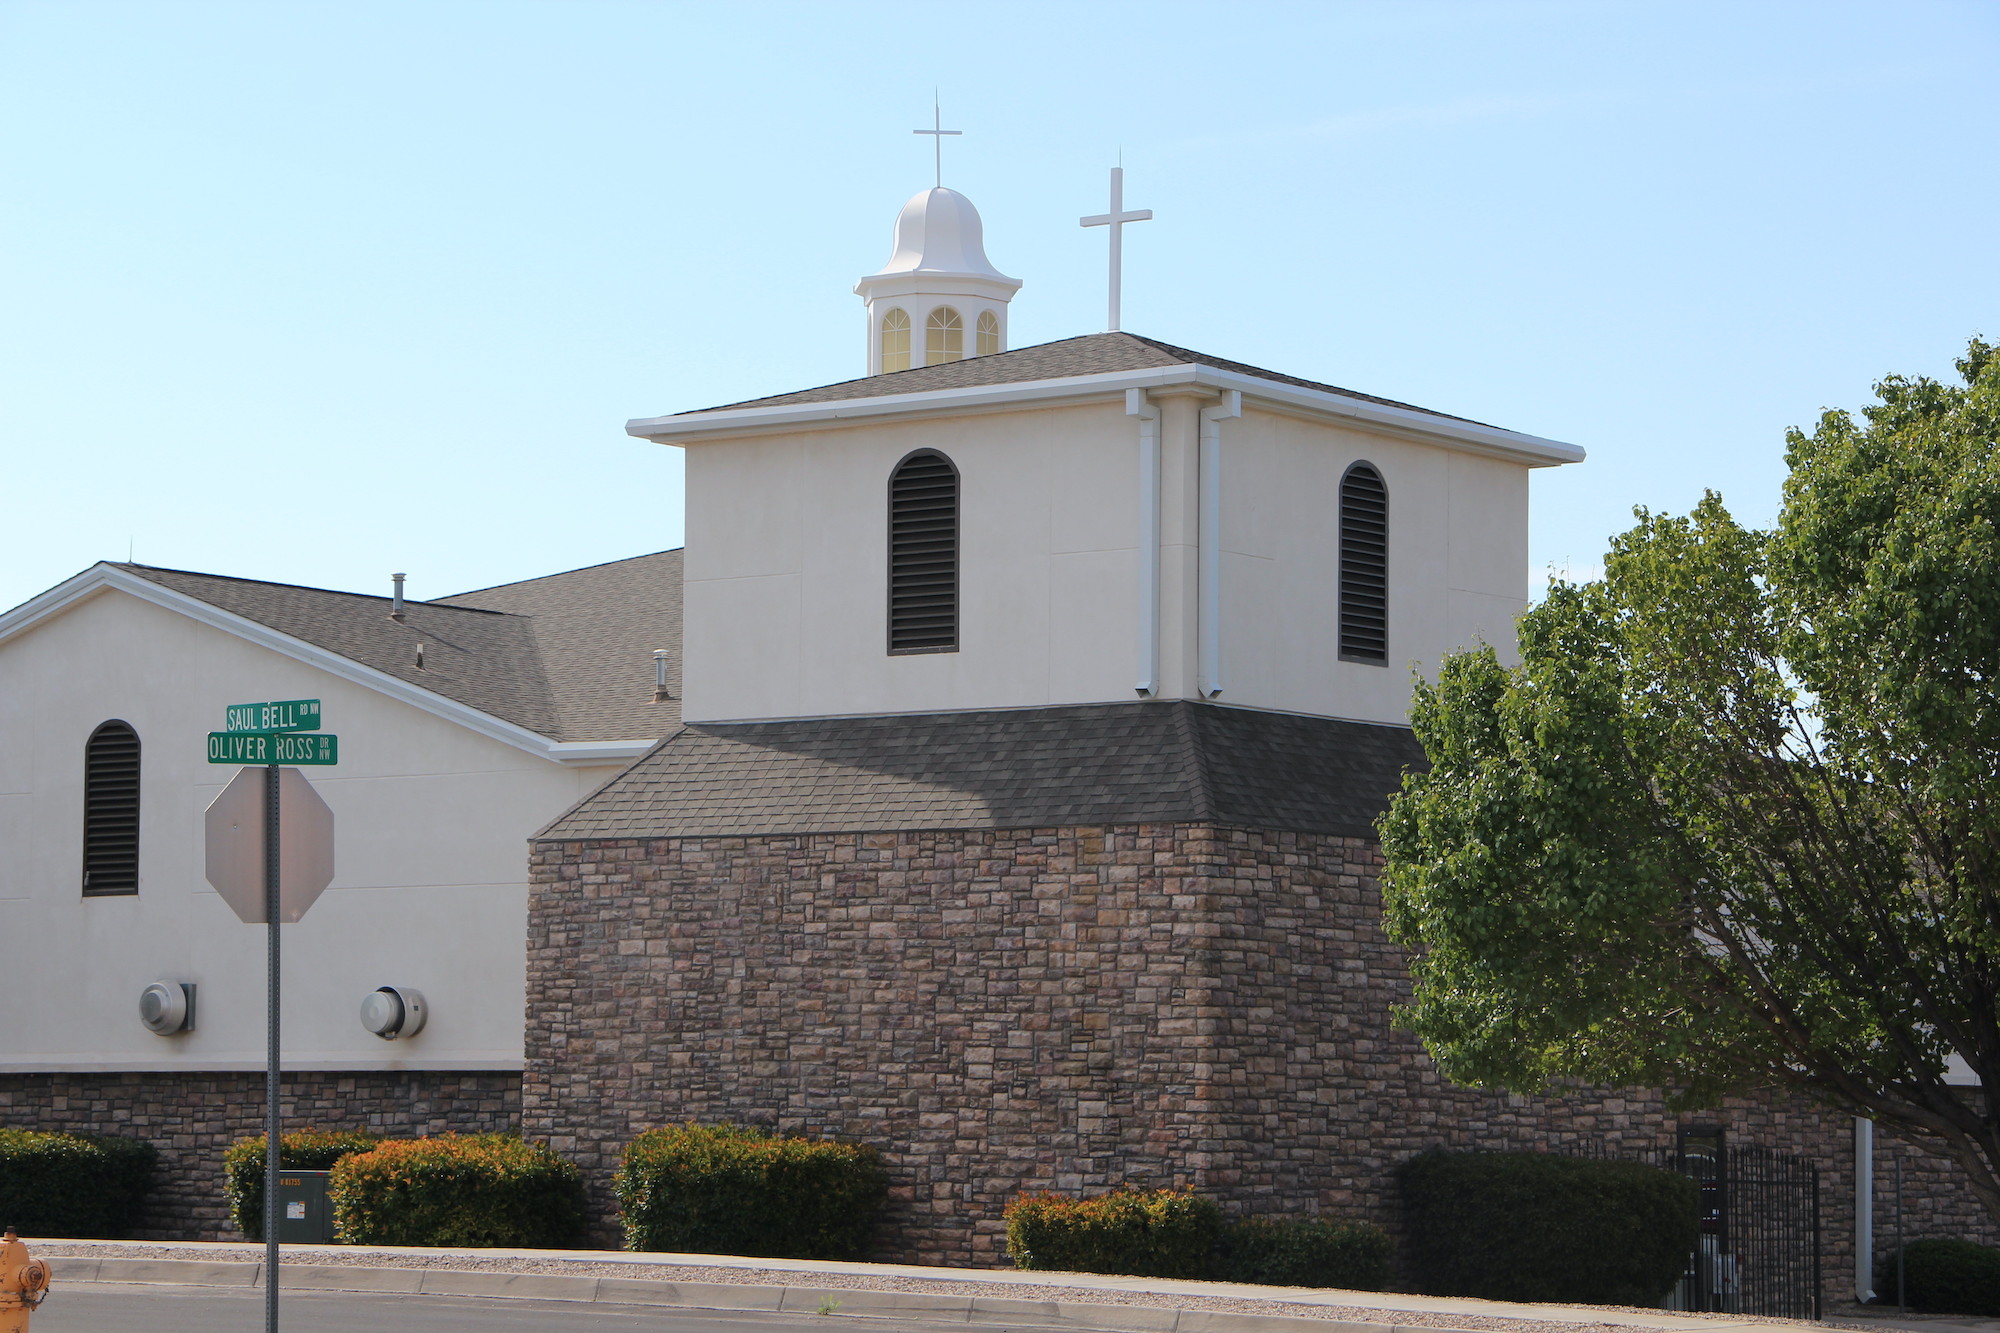 Picture of Fellowship Baptist Church 8550 Saul Bell Rd NW, Albuquerque, NM 87121